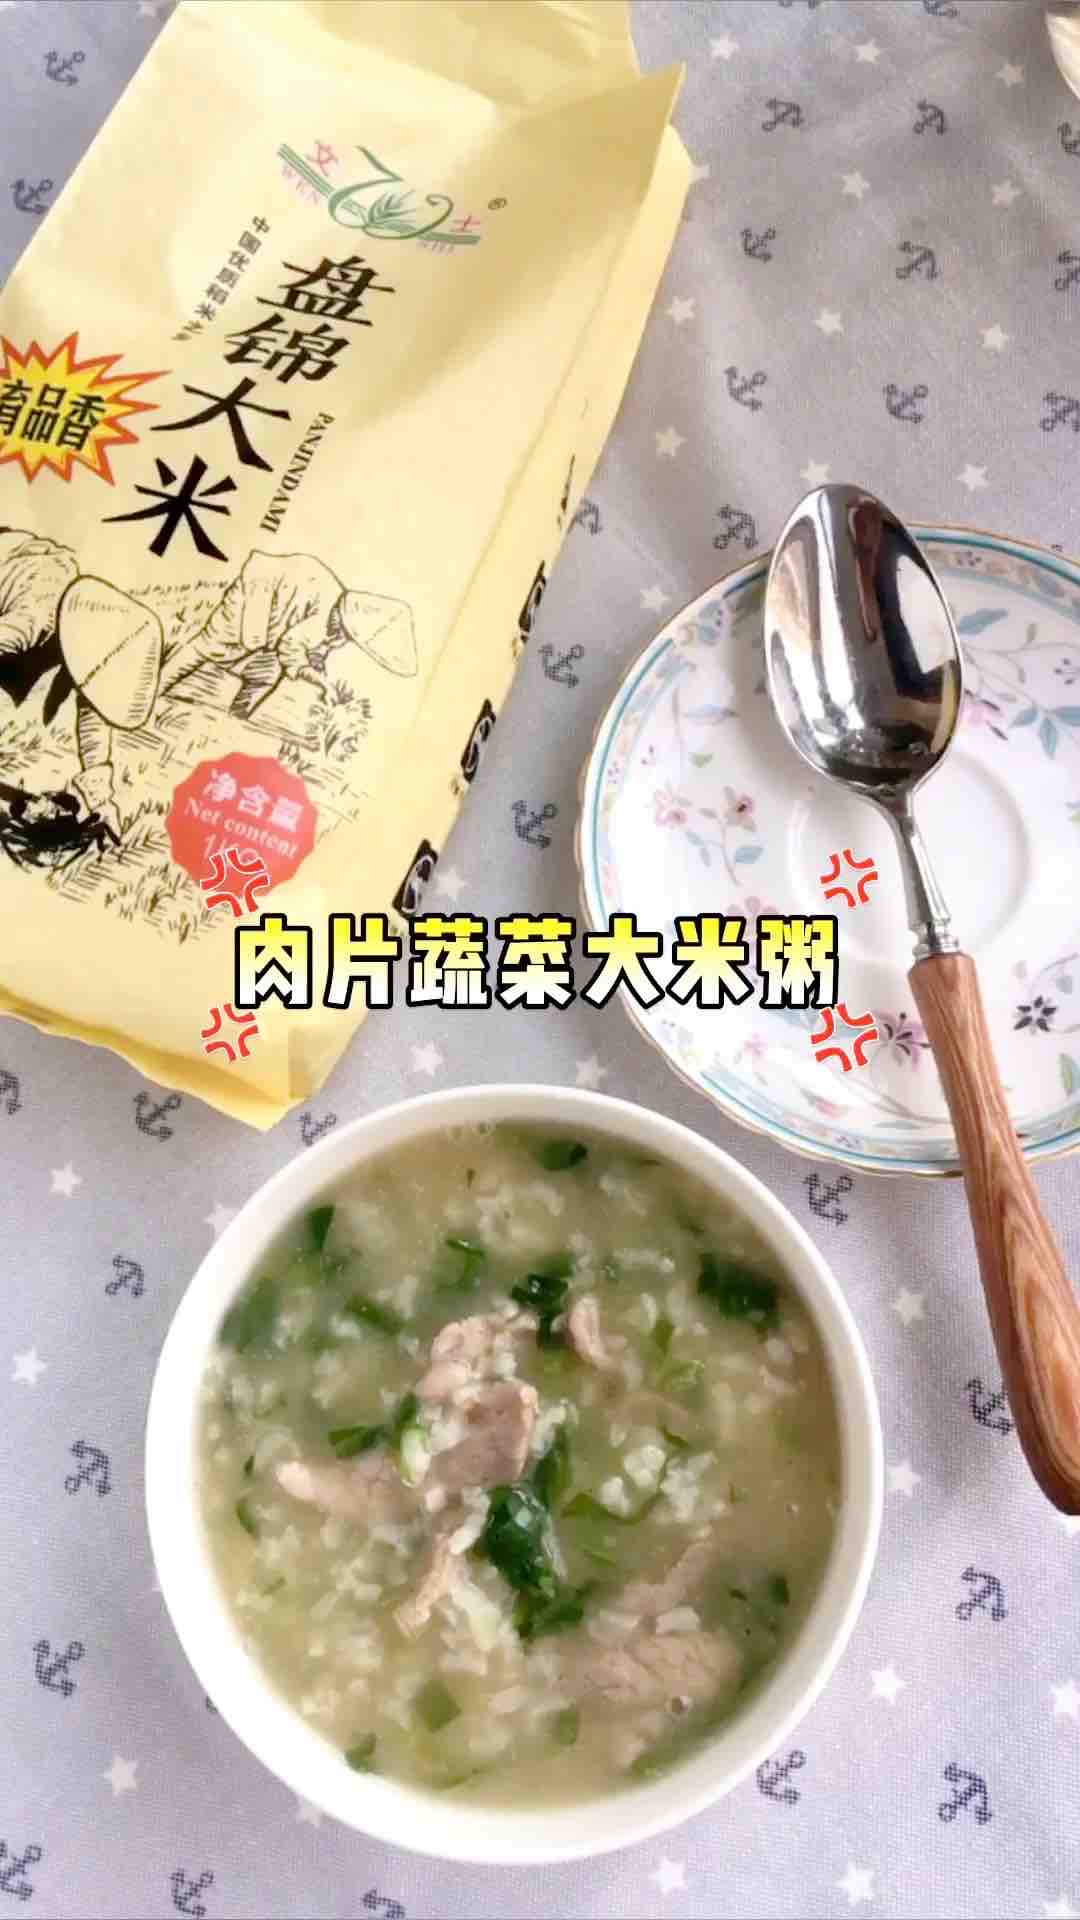 Rice Porridge with Sliced Meat and Vegetables recipe